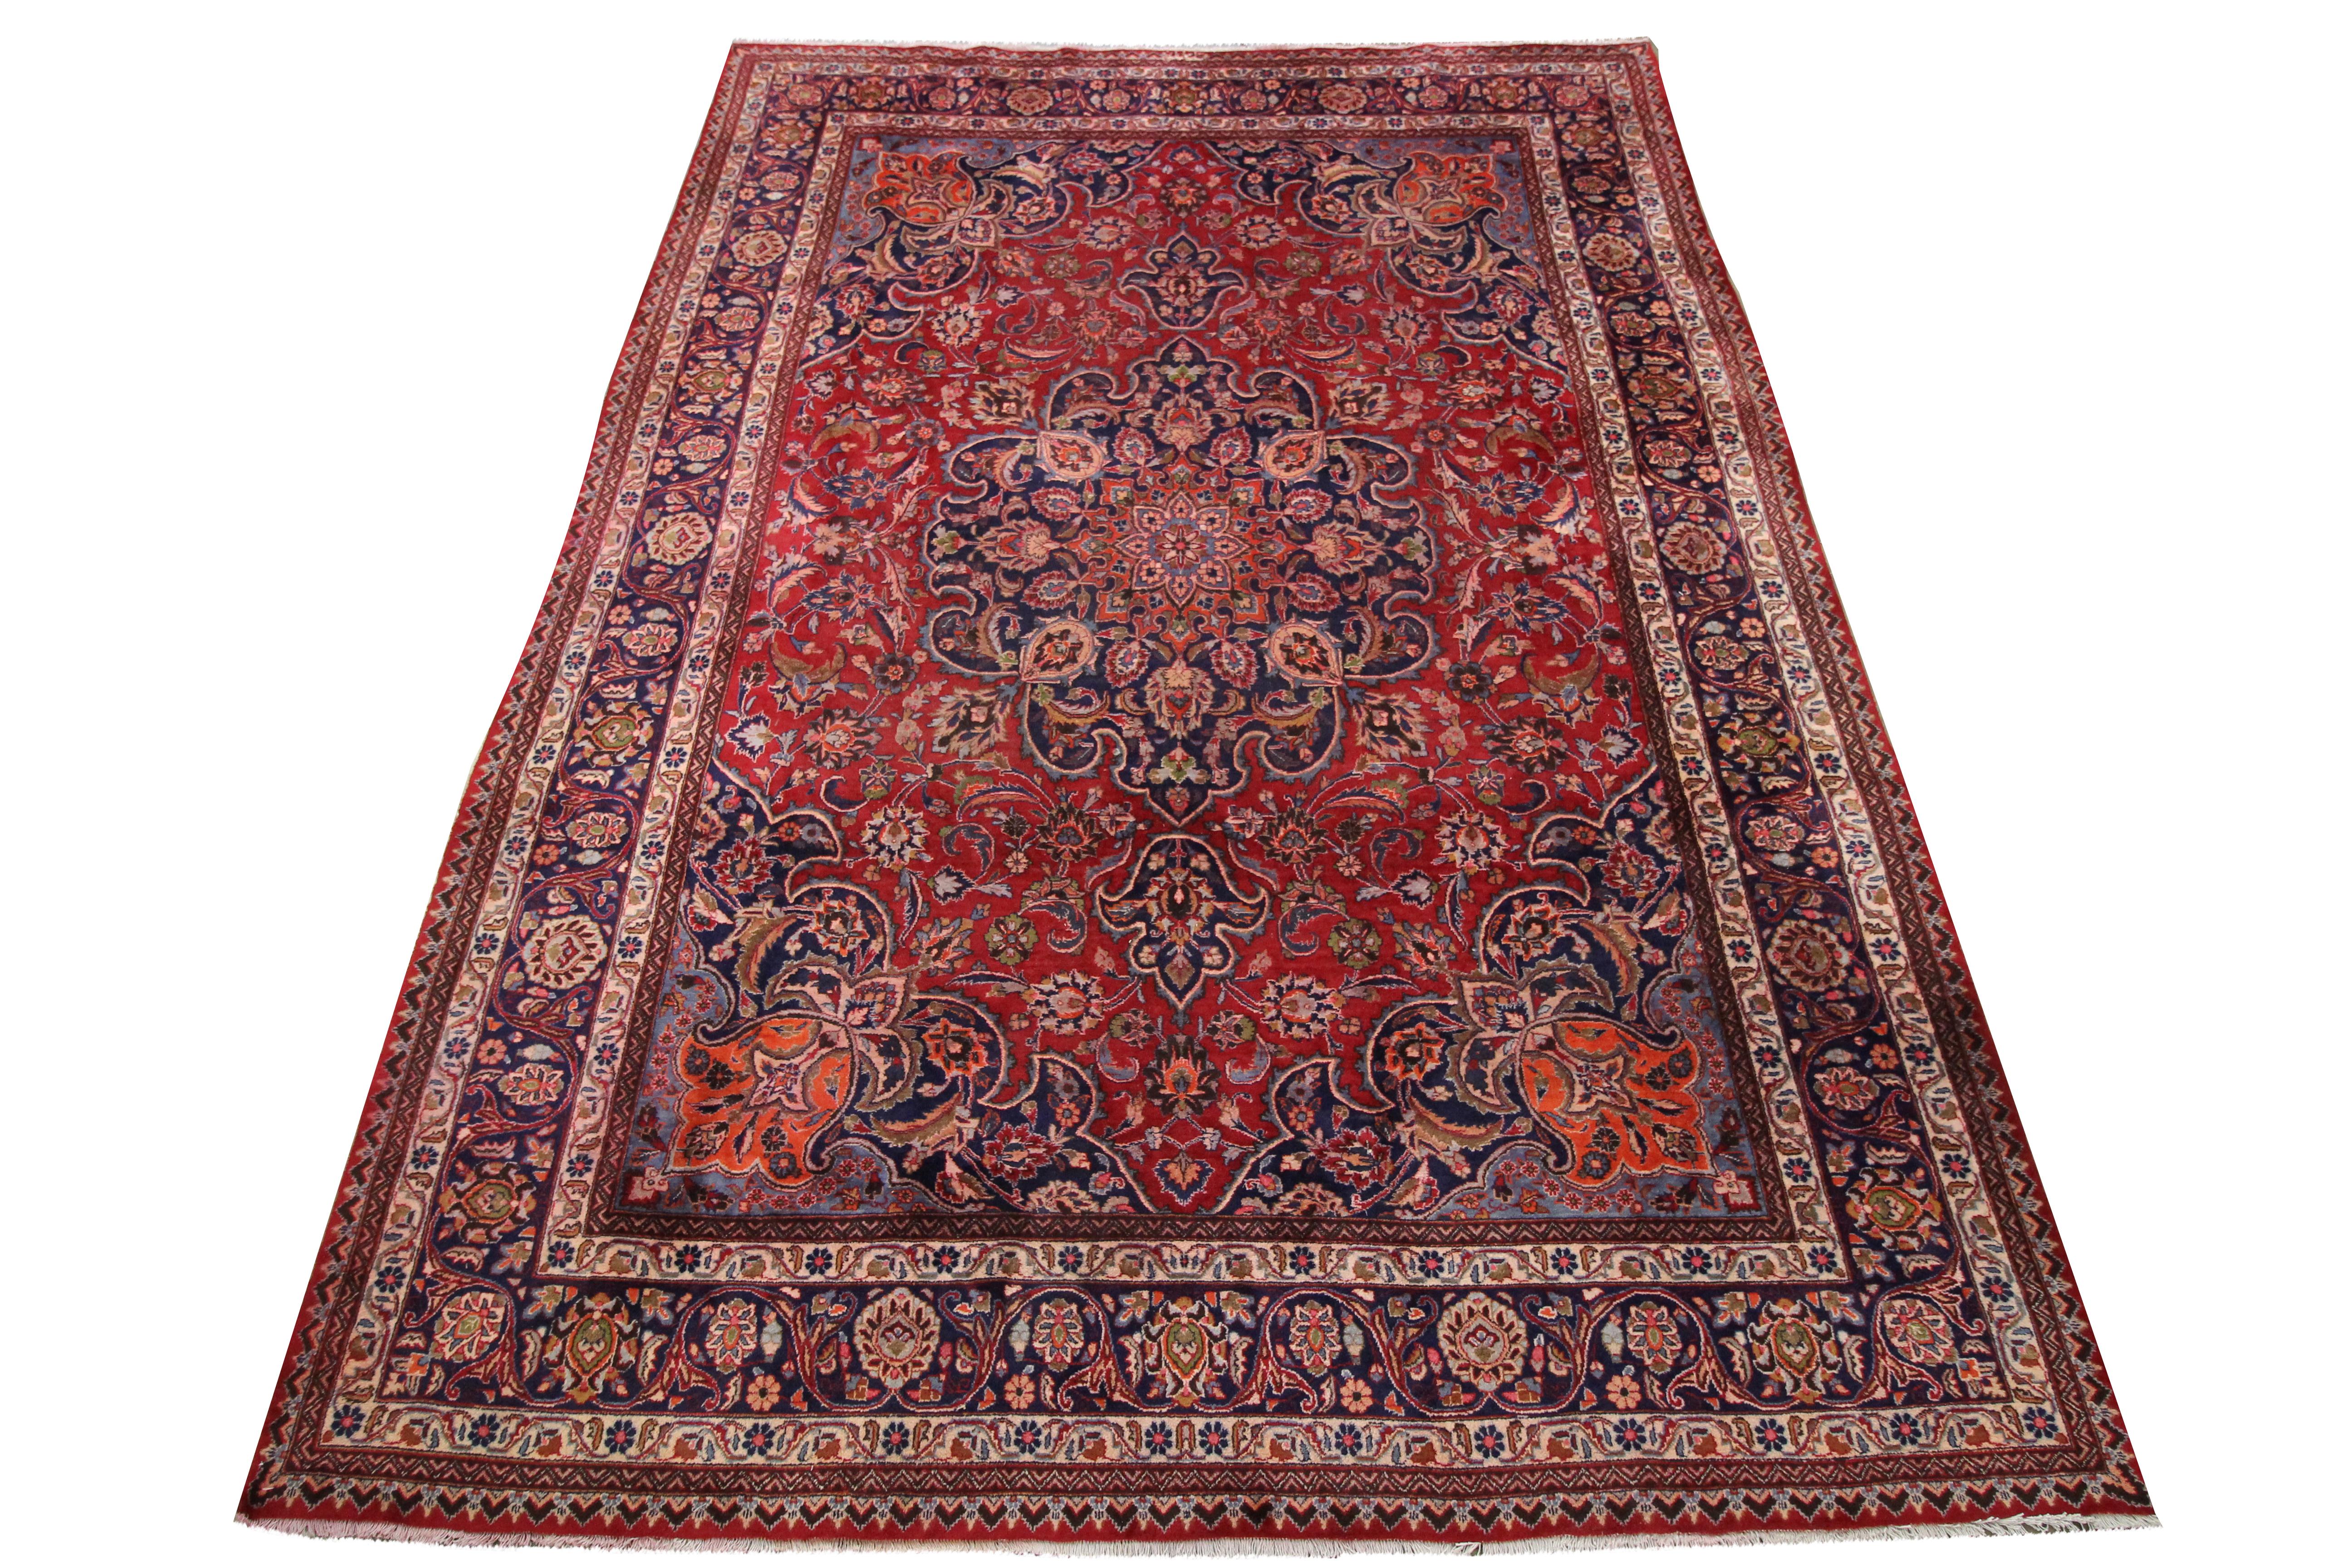 This vintage wool area rug is an excellent example of rugs woven by hand in the mid 20th century. Featuring a highly-decorative central medallion design that has been woven on a rich red background in blue, rust, cream and brown accents. This has